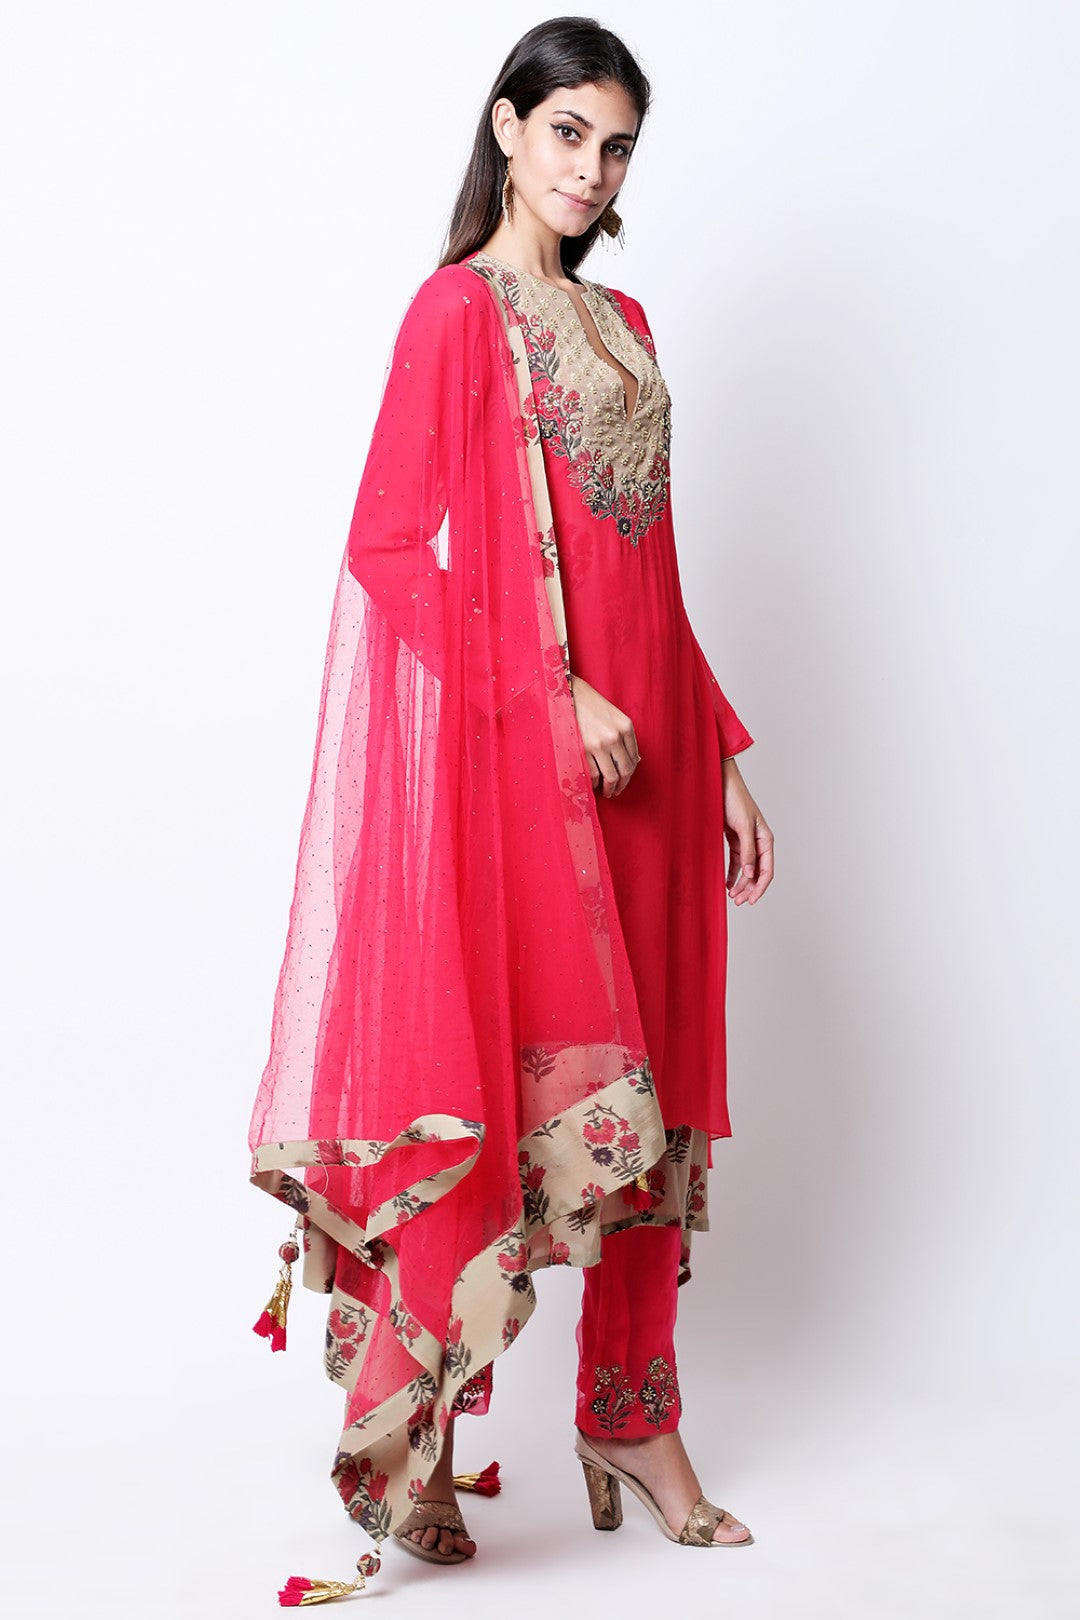 Rose red double layered  asymmetric tunic , paired with mukesh dupatta and pants.